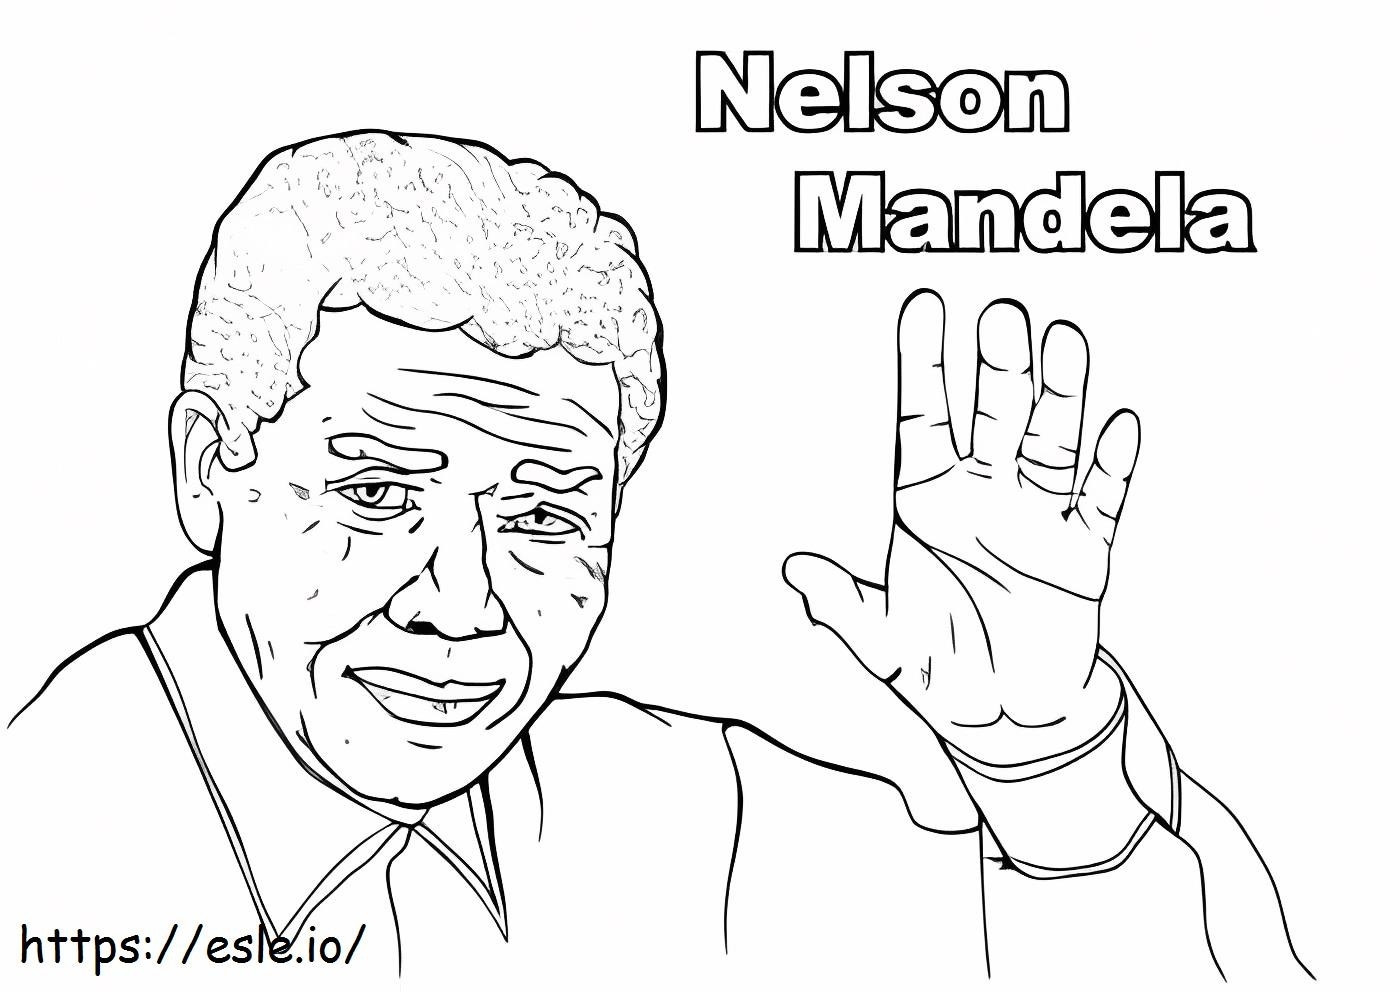 Nelson Mandela 3 coloring page